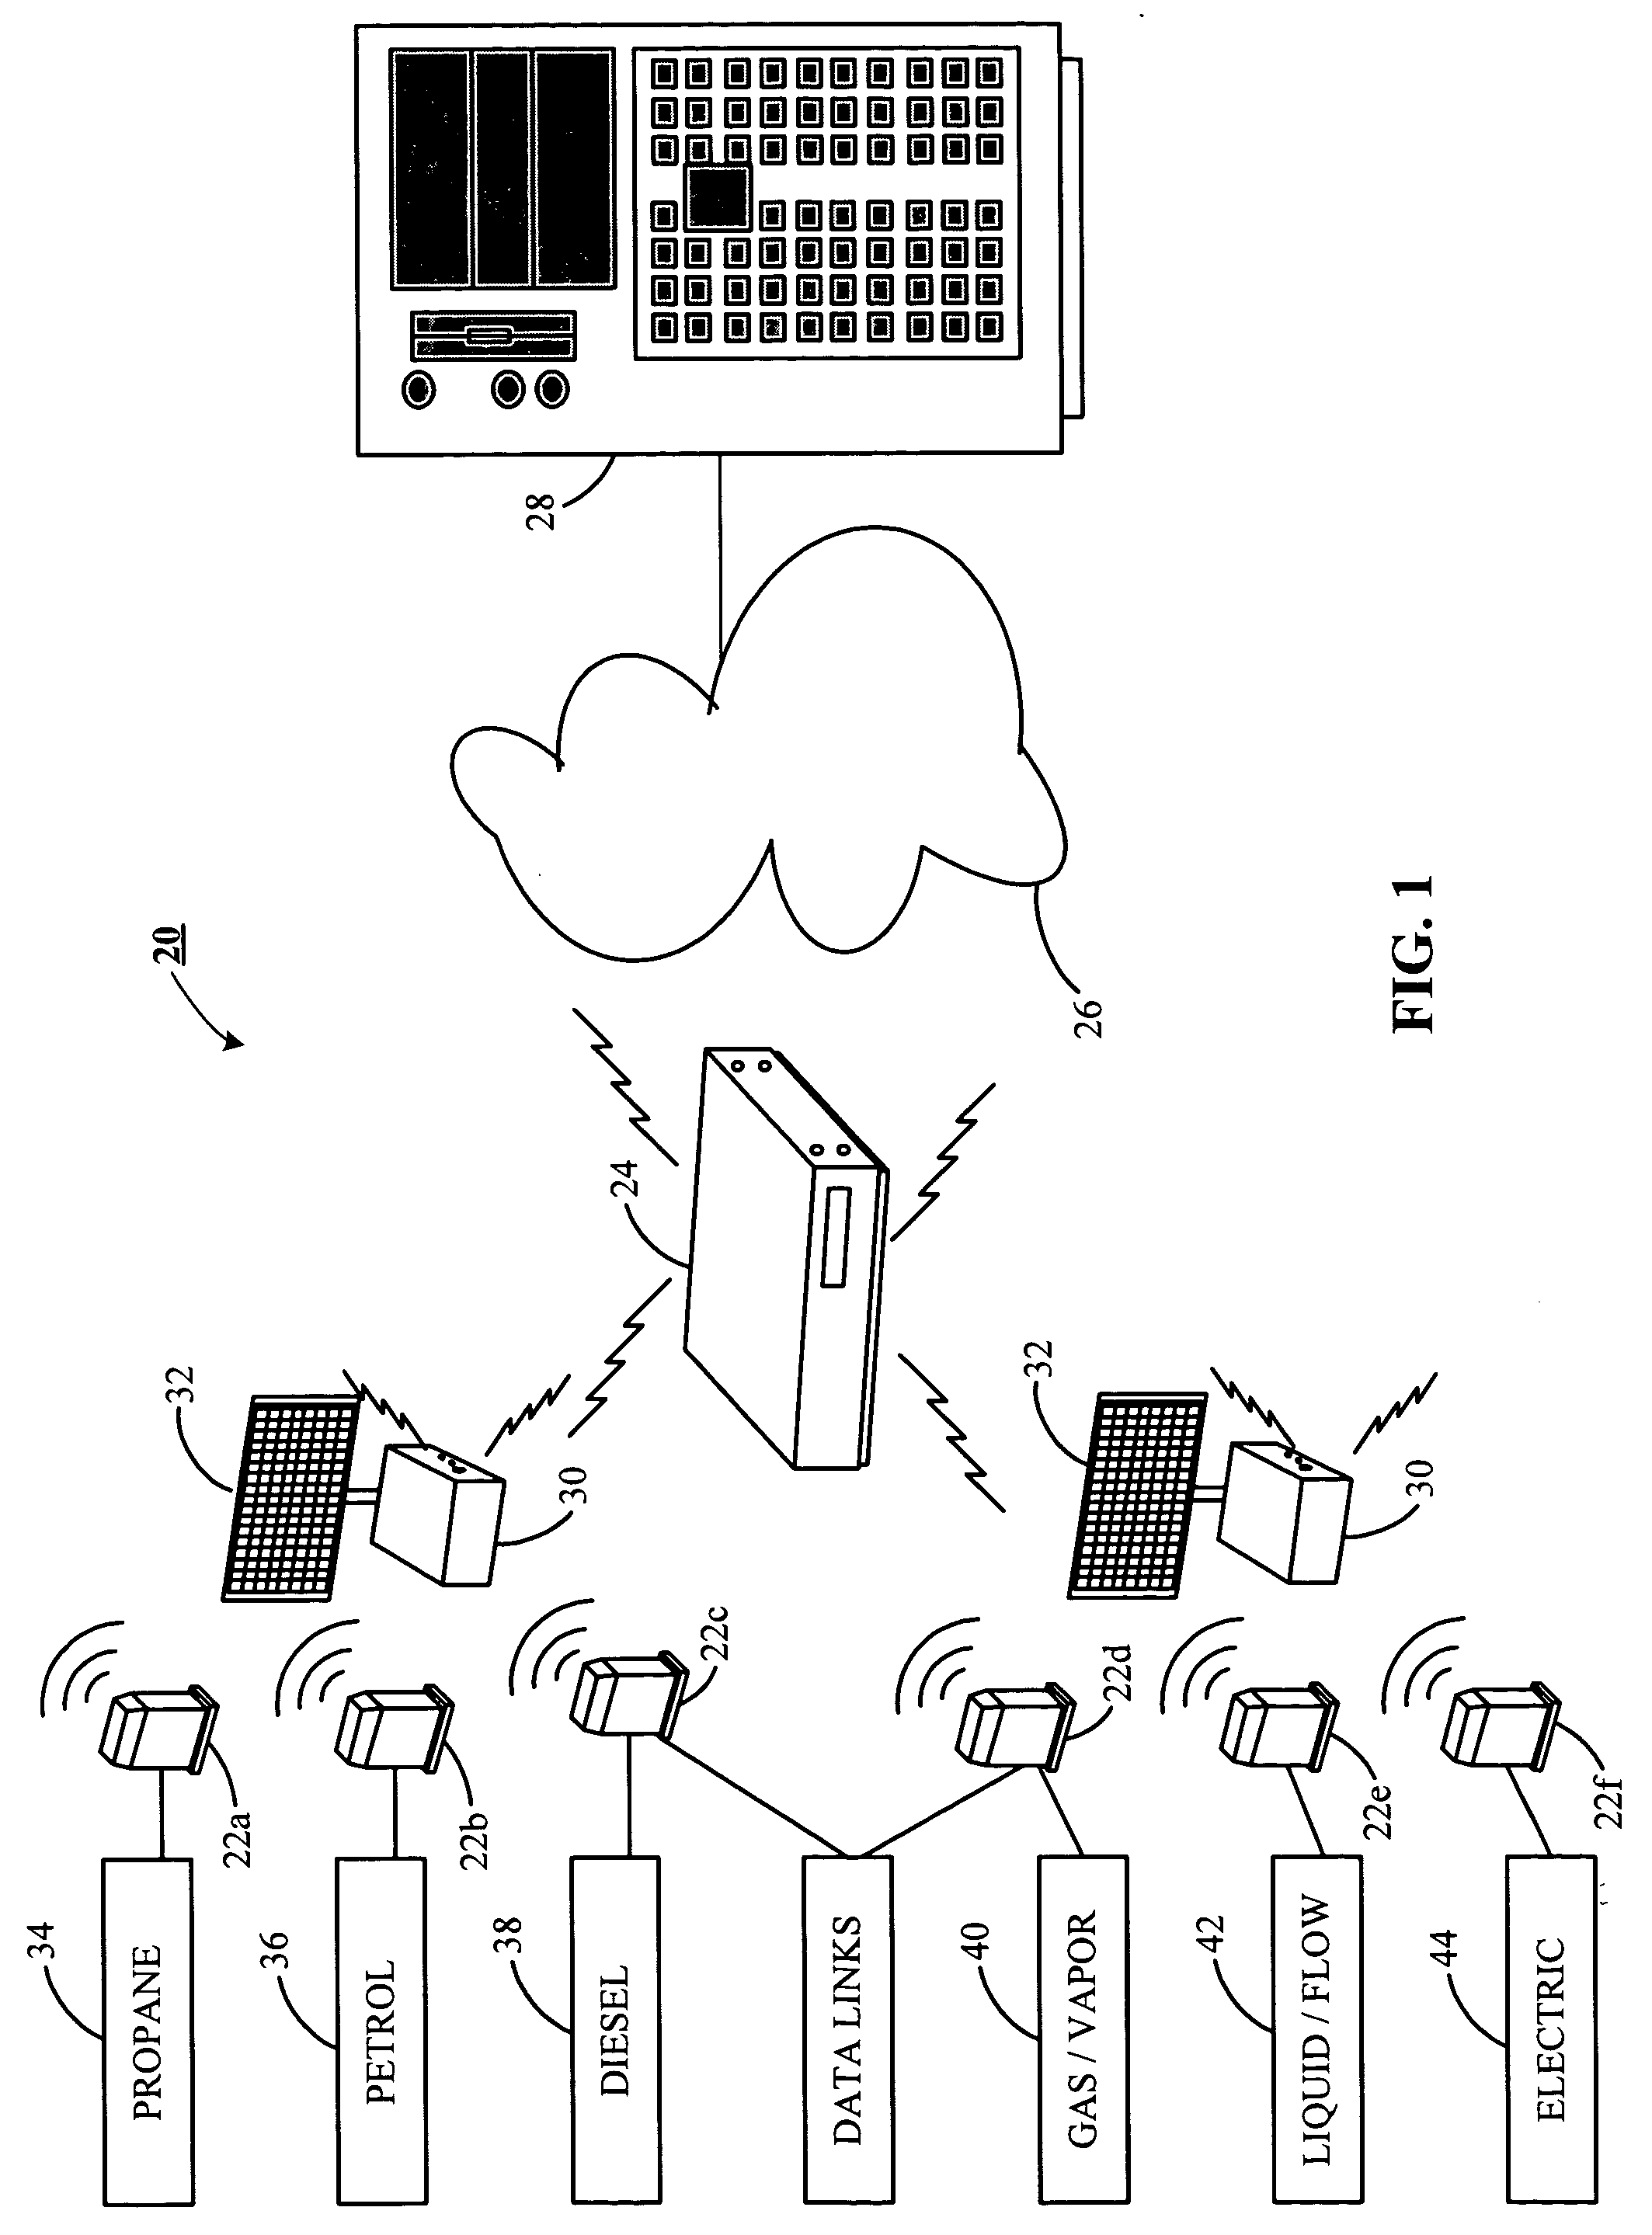 System and method for remote asset monitoring